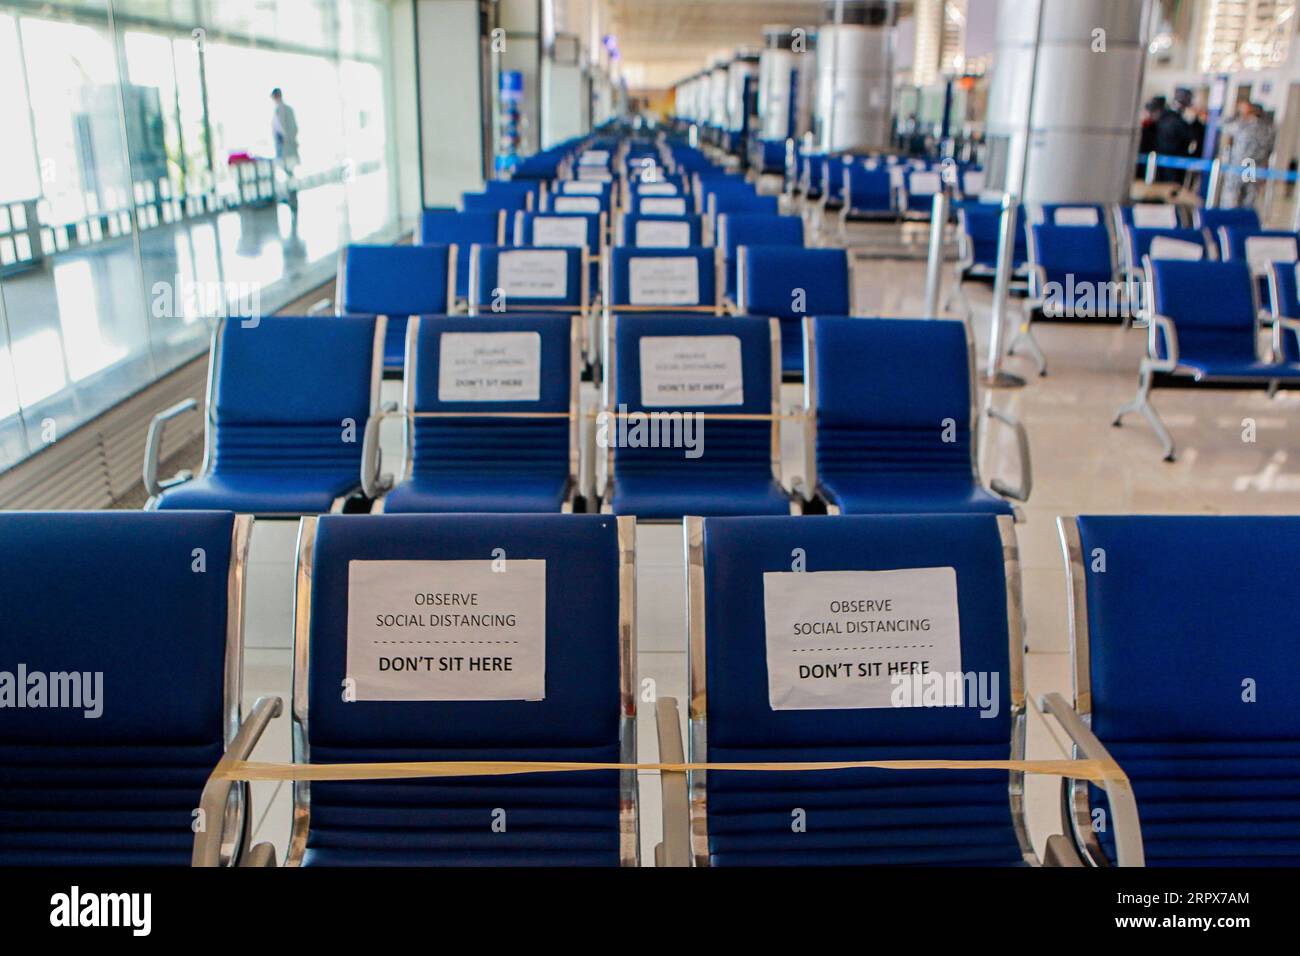 200511 -- MANILA, May 11, 2020 Xinhua -- Social distancing signs are placed on seats at the Manila Ninoy Aquino International Airport in the Philippines, May 11, 2020. All foreigners and Filipinos arriving in the Philippines need to undergo testing for the COVID-19 and quarantine to stem the spread of the virus, Presidential spokesperson Harry Roque said on Monday. Xinhua/Rouelle Umali PHILIPPINES-MANILA-COVID-19-FLIGHTS-TEST PUBLICATIONxNOTxINxCHN Stock Photo